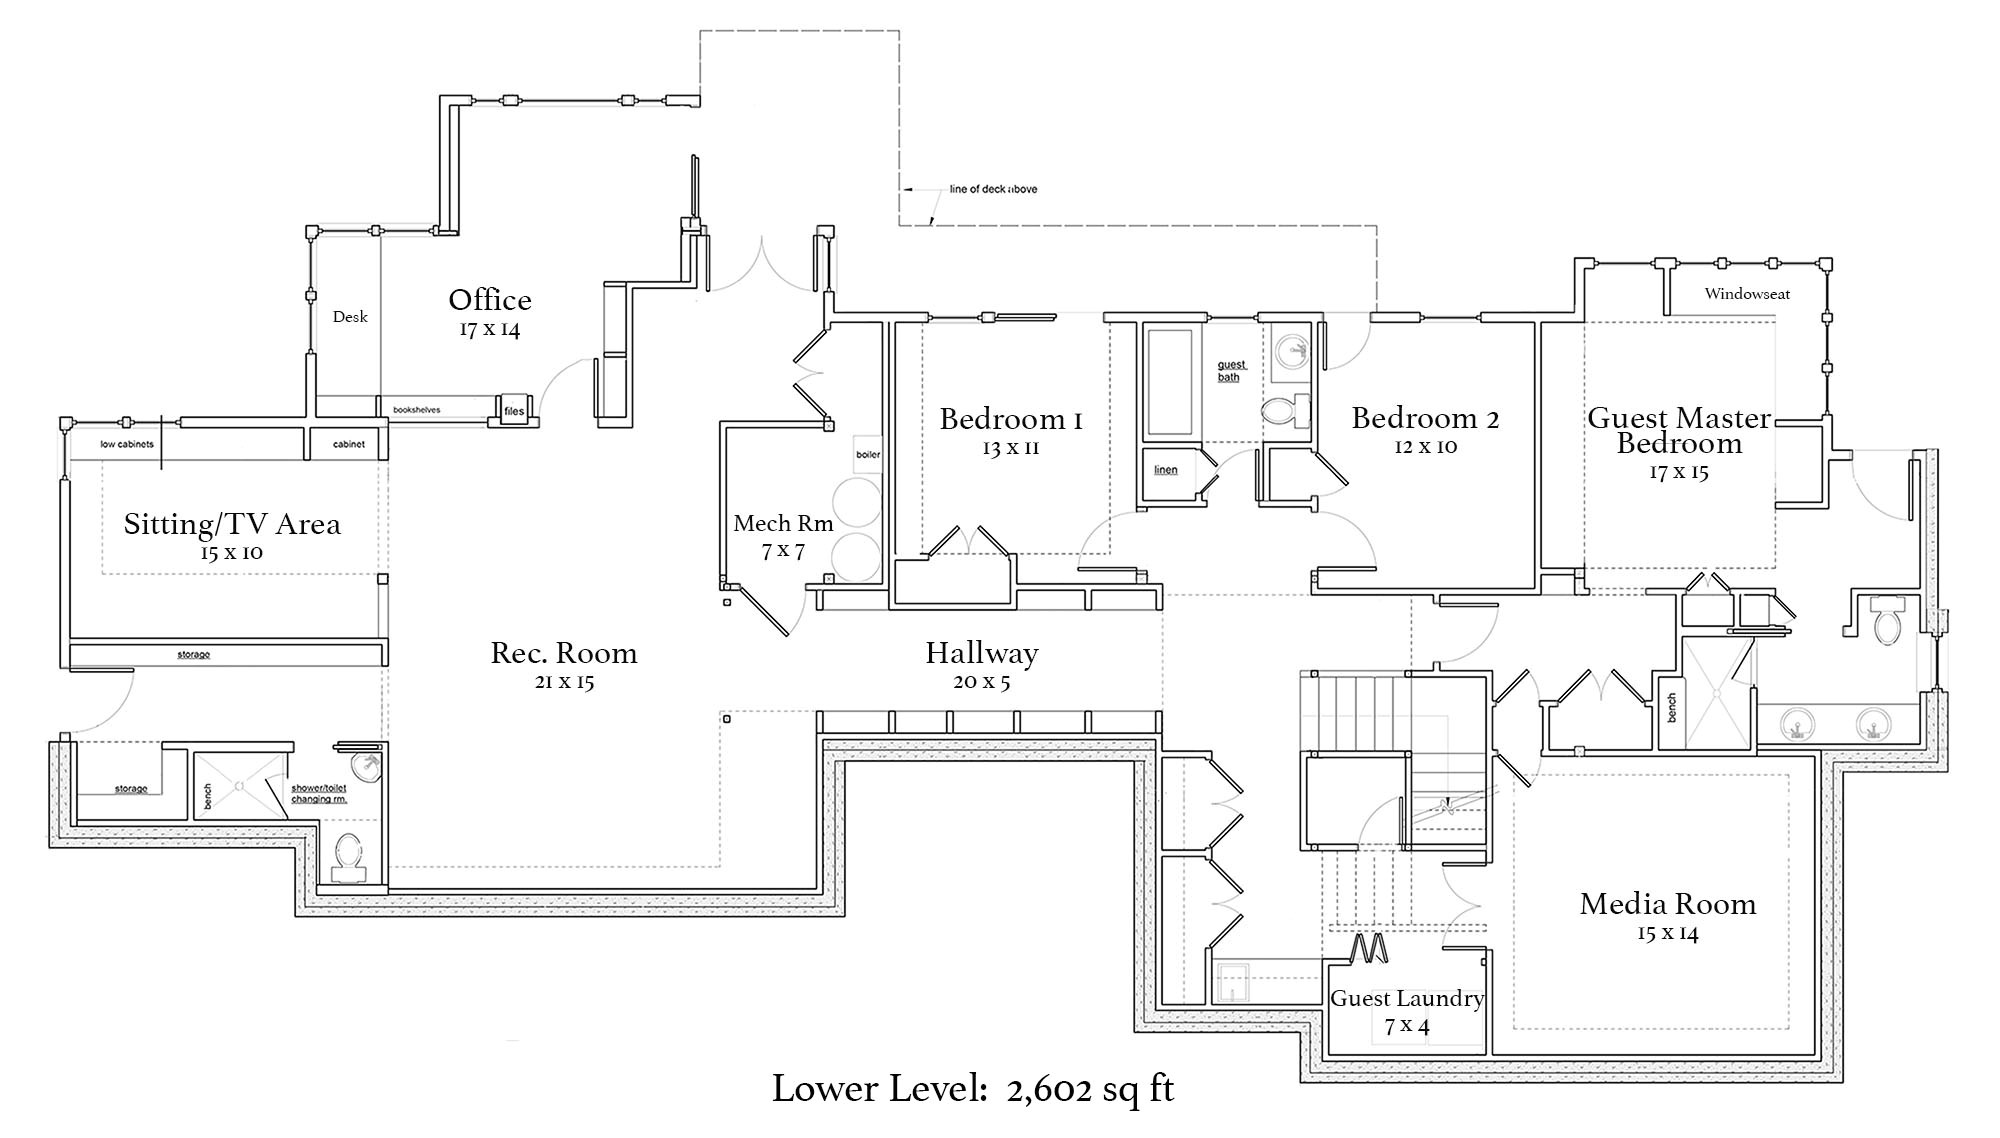 Single Level House Plans with Two Master Suites One Level House Plans with Two Master Suites Arts Bedroom